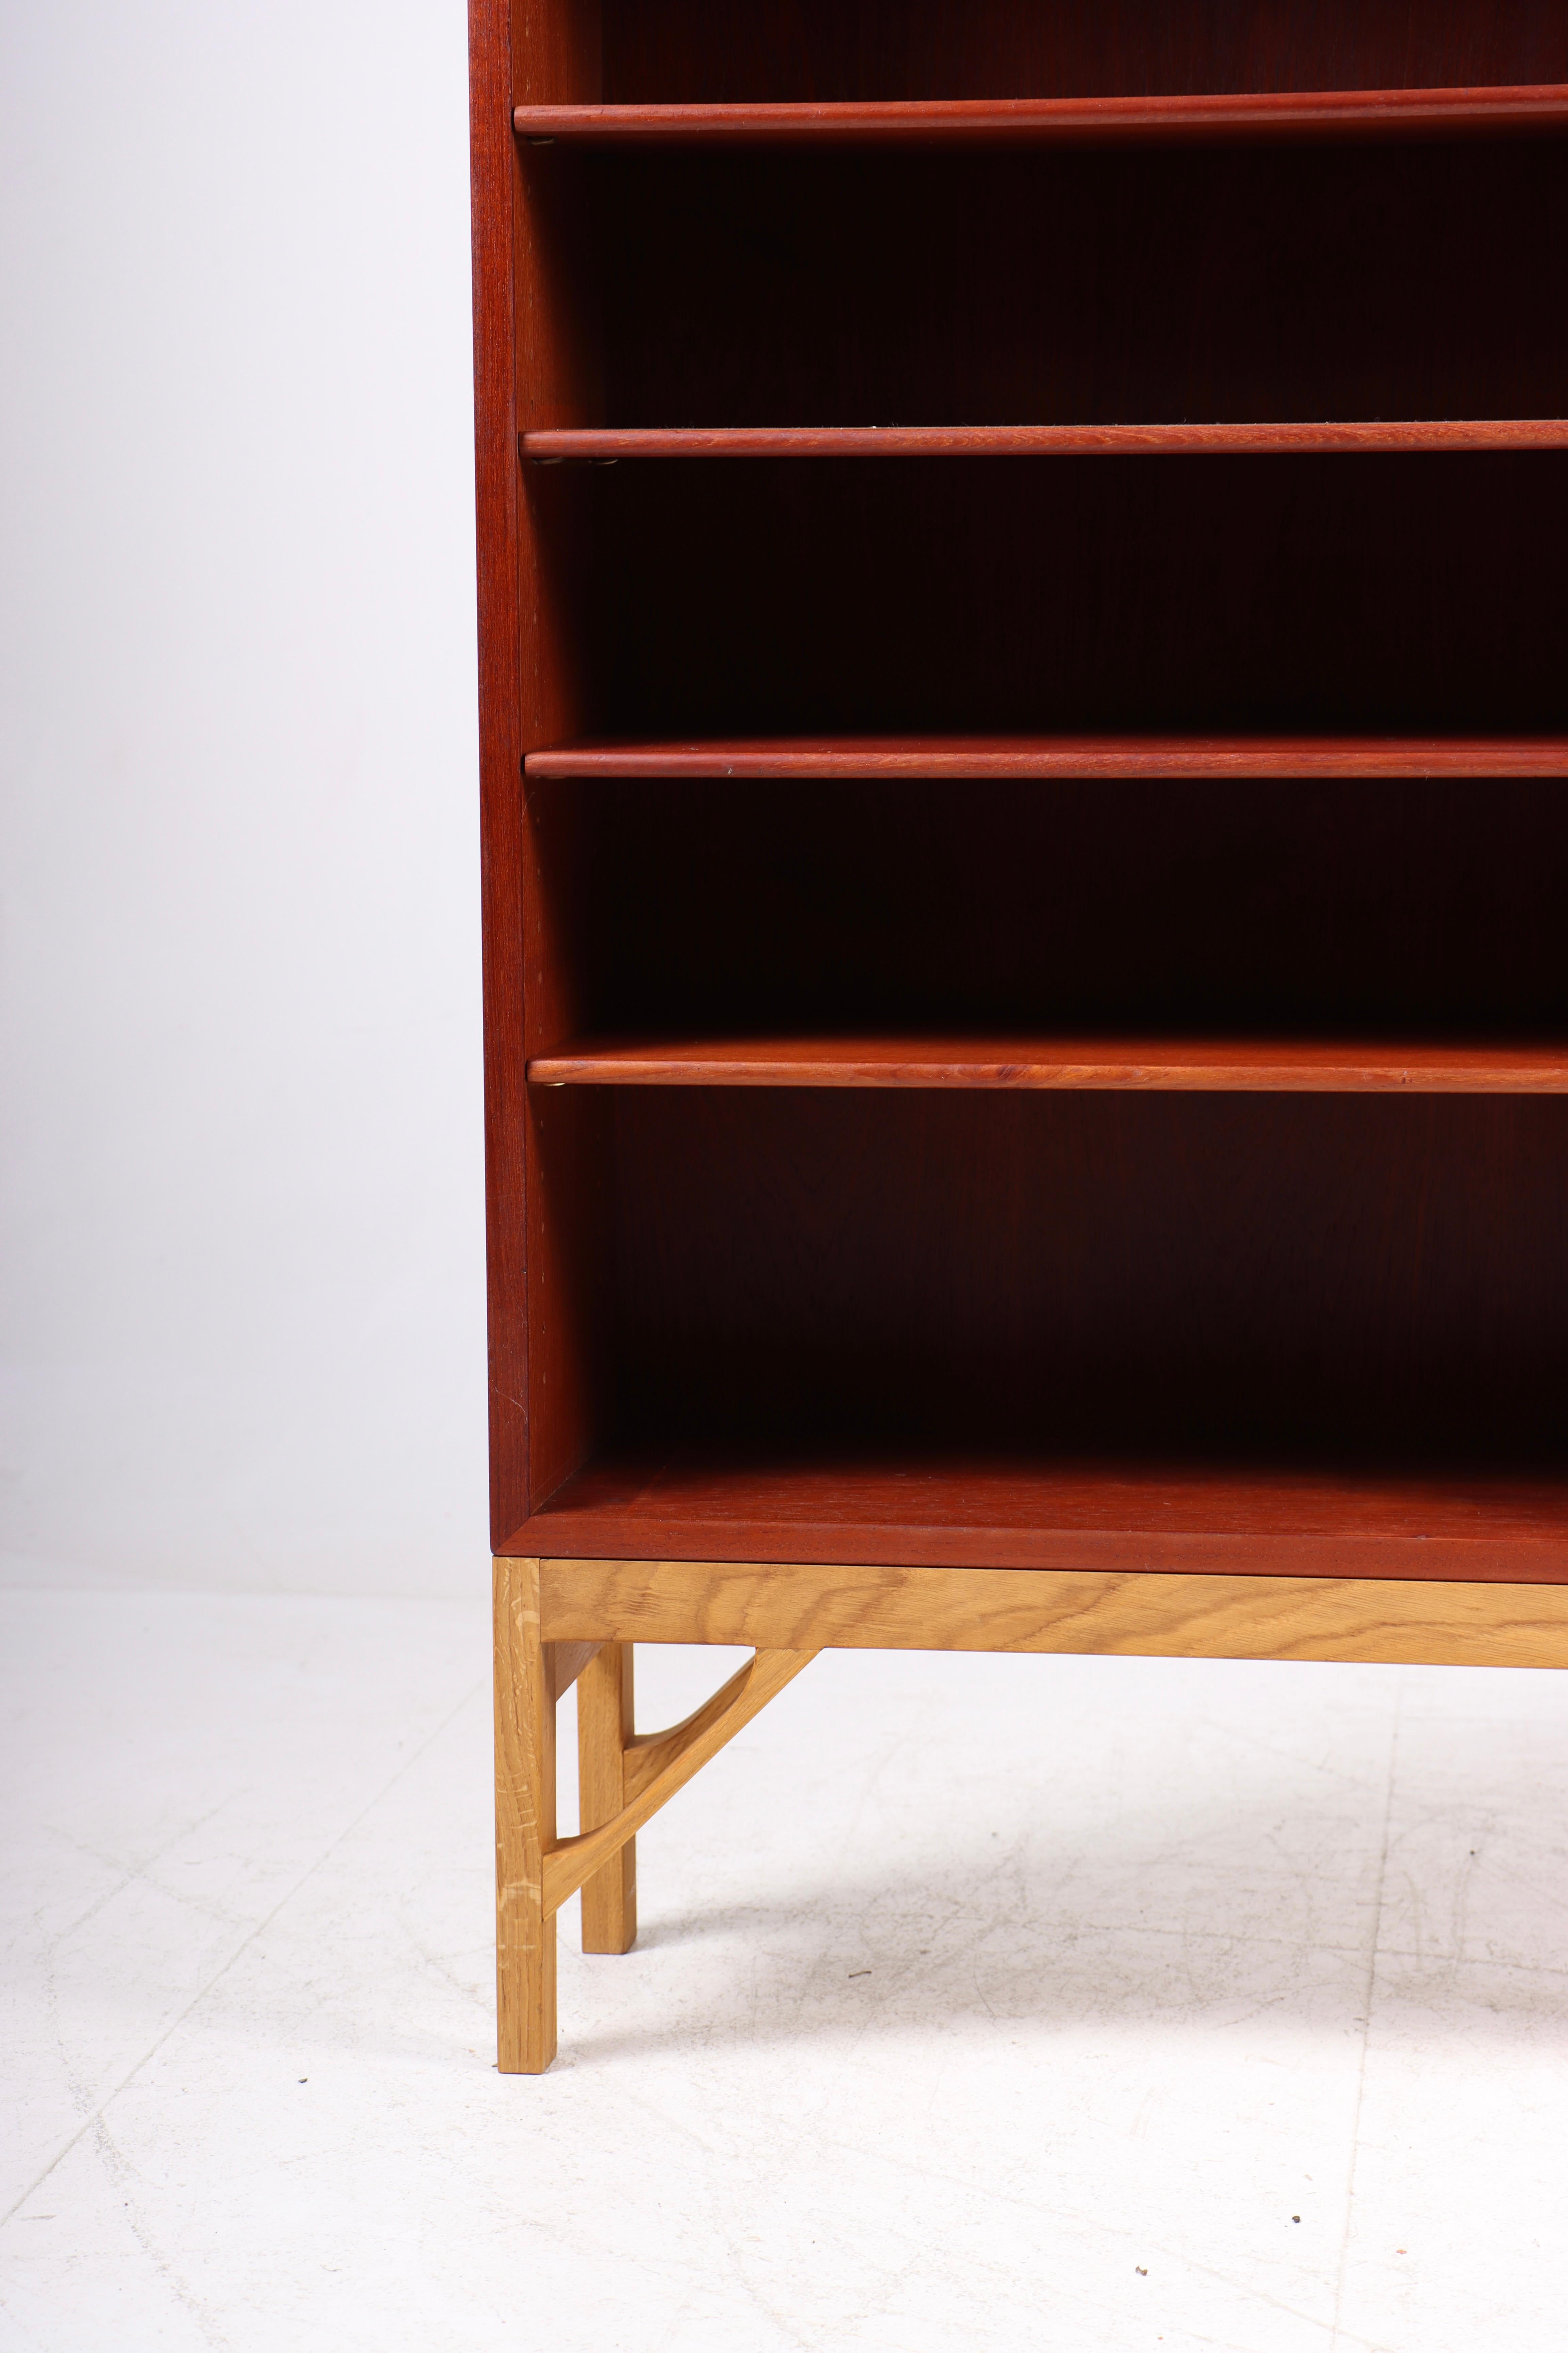 China bookcase in teak and oak. Designed by MAA. Børge Mogensen in 1958, this piece is made by CM Madsen Cabinetmakers Denmark in the 1960s. Great original condition.